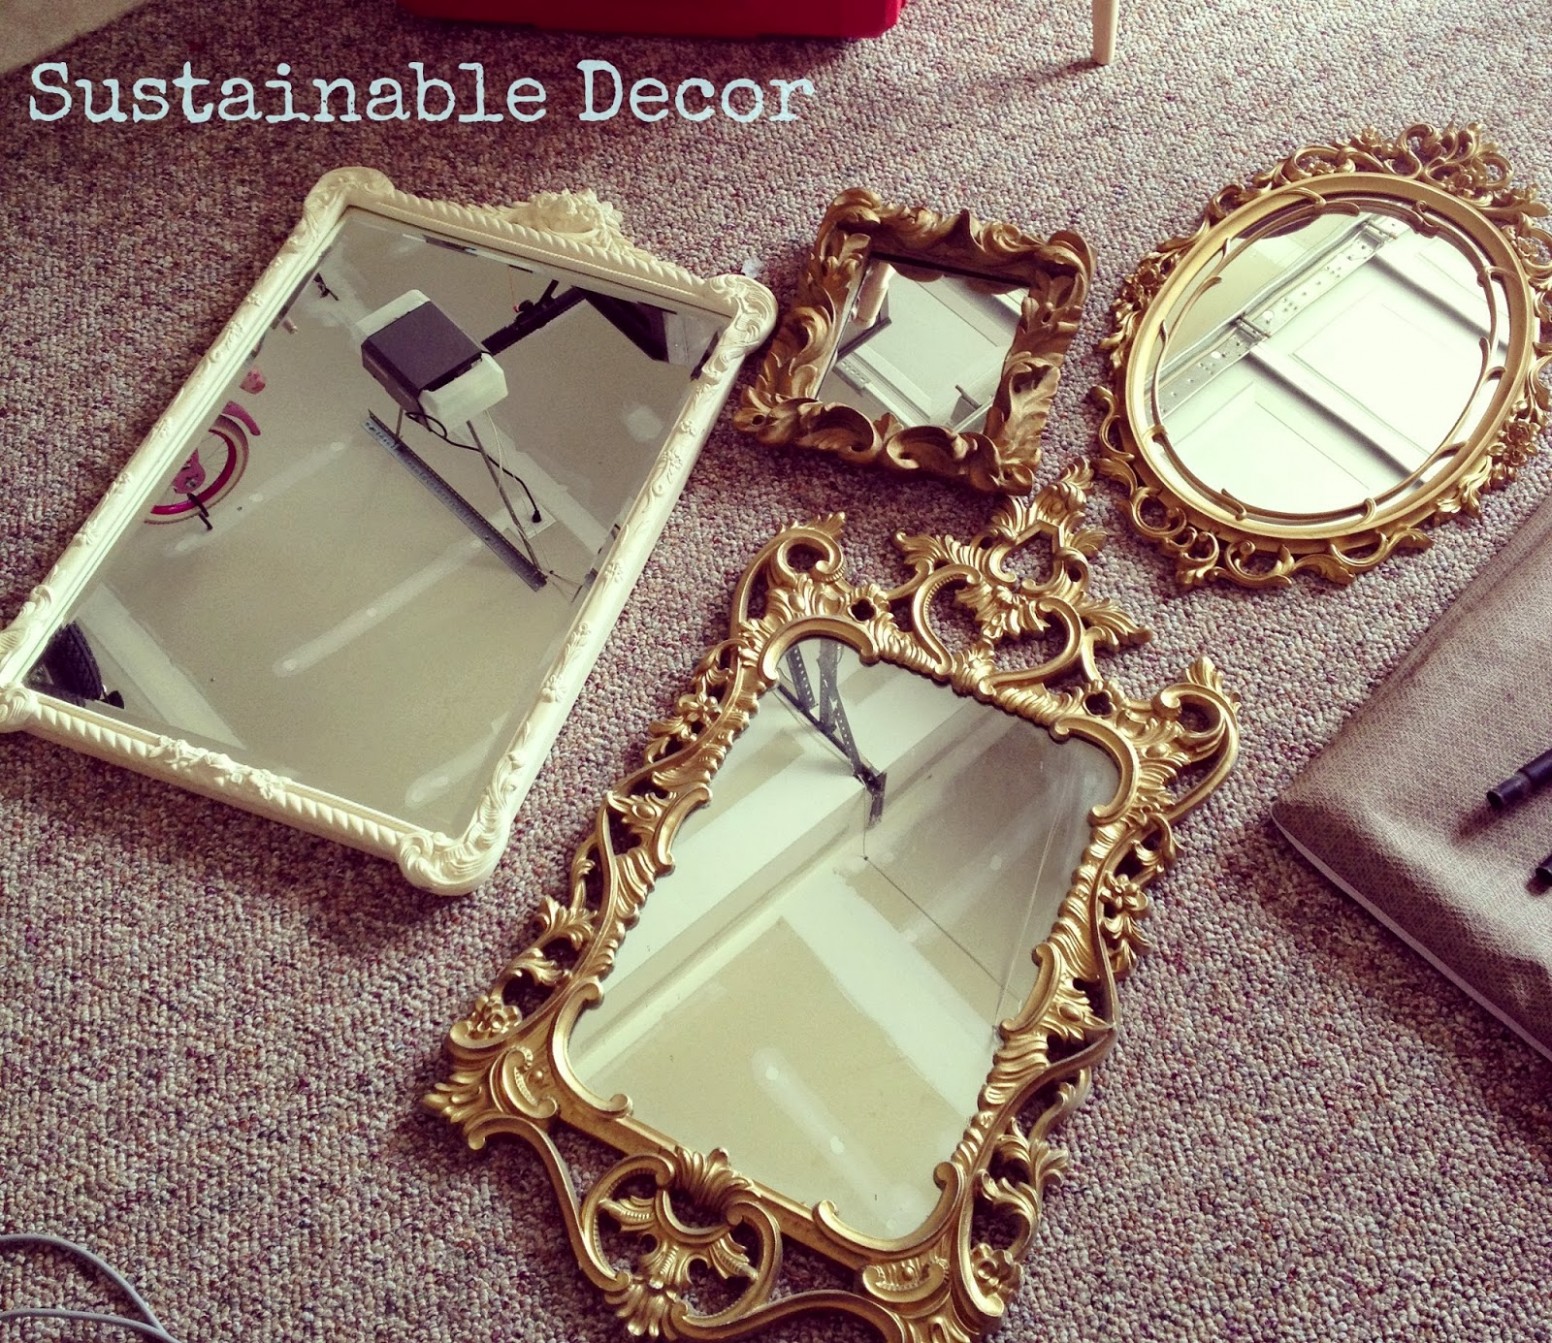 Sustainable Decor: Diy Upcycled Painted Mirror: Annie Sloan Chalk ..